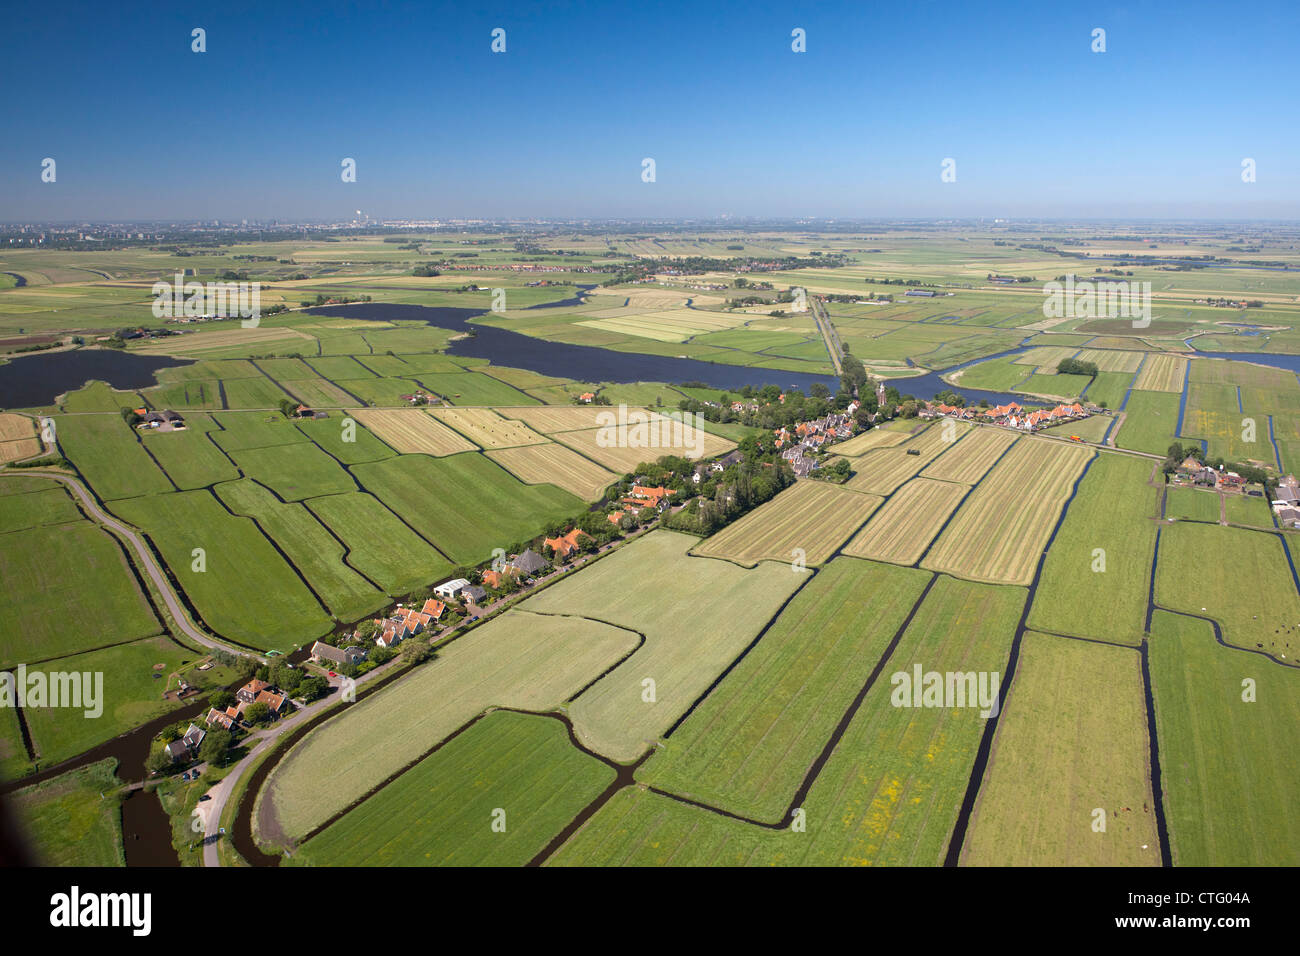 The Netherlands, Zuiderwoude. Aerial. View of village and polder landscape. Stock Photo